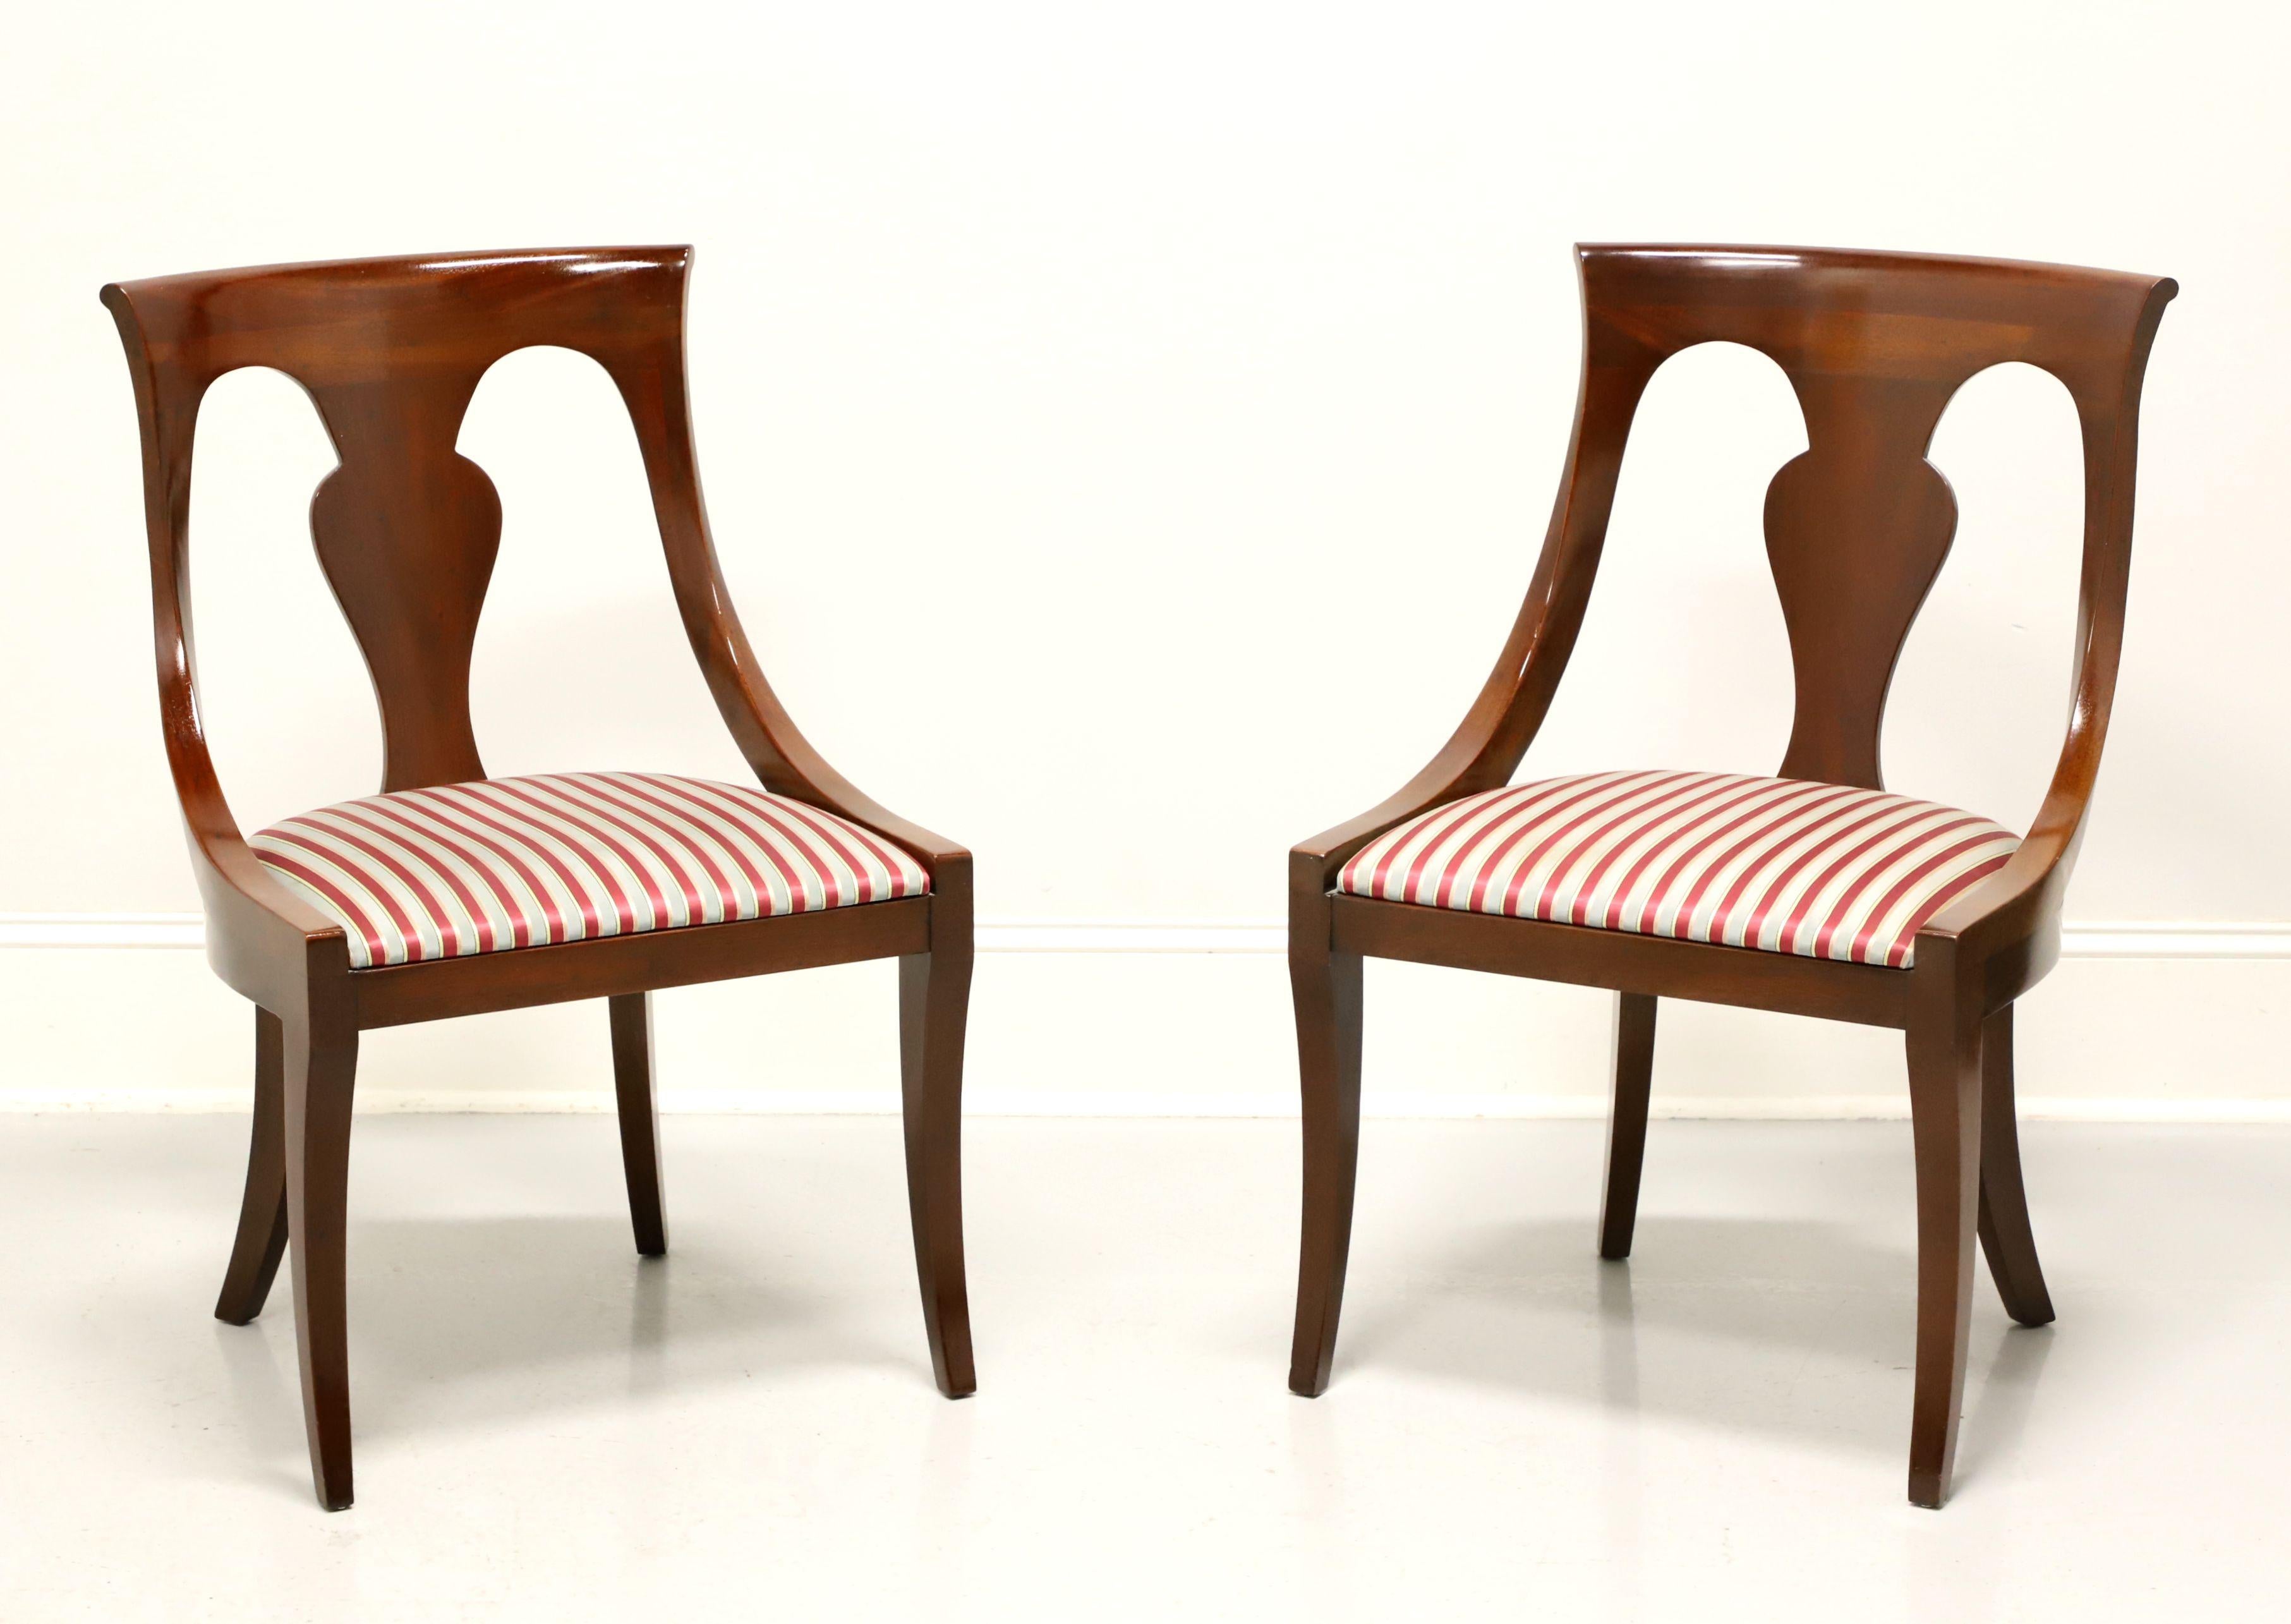 DREXEL HERITAGE Mahogany Empire Style Dining Side Chairs - Pair A 3